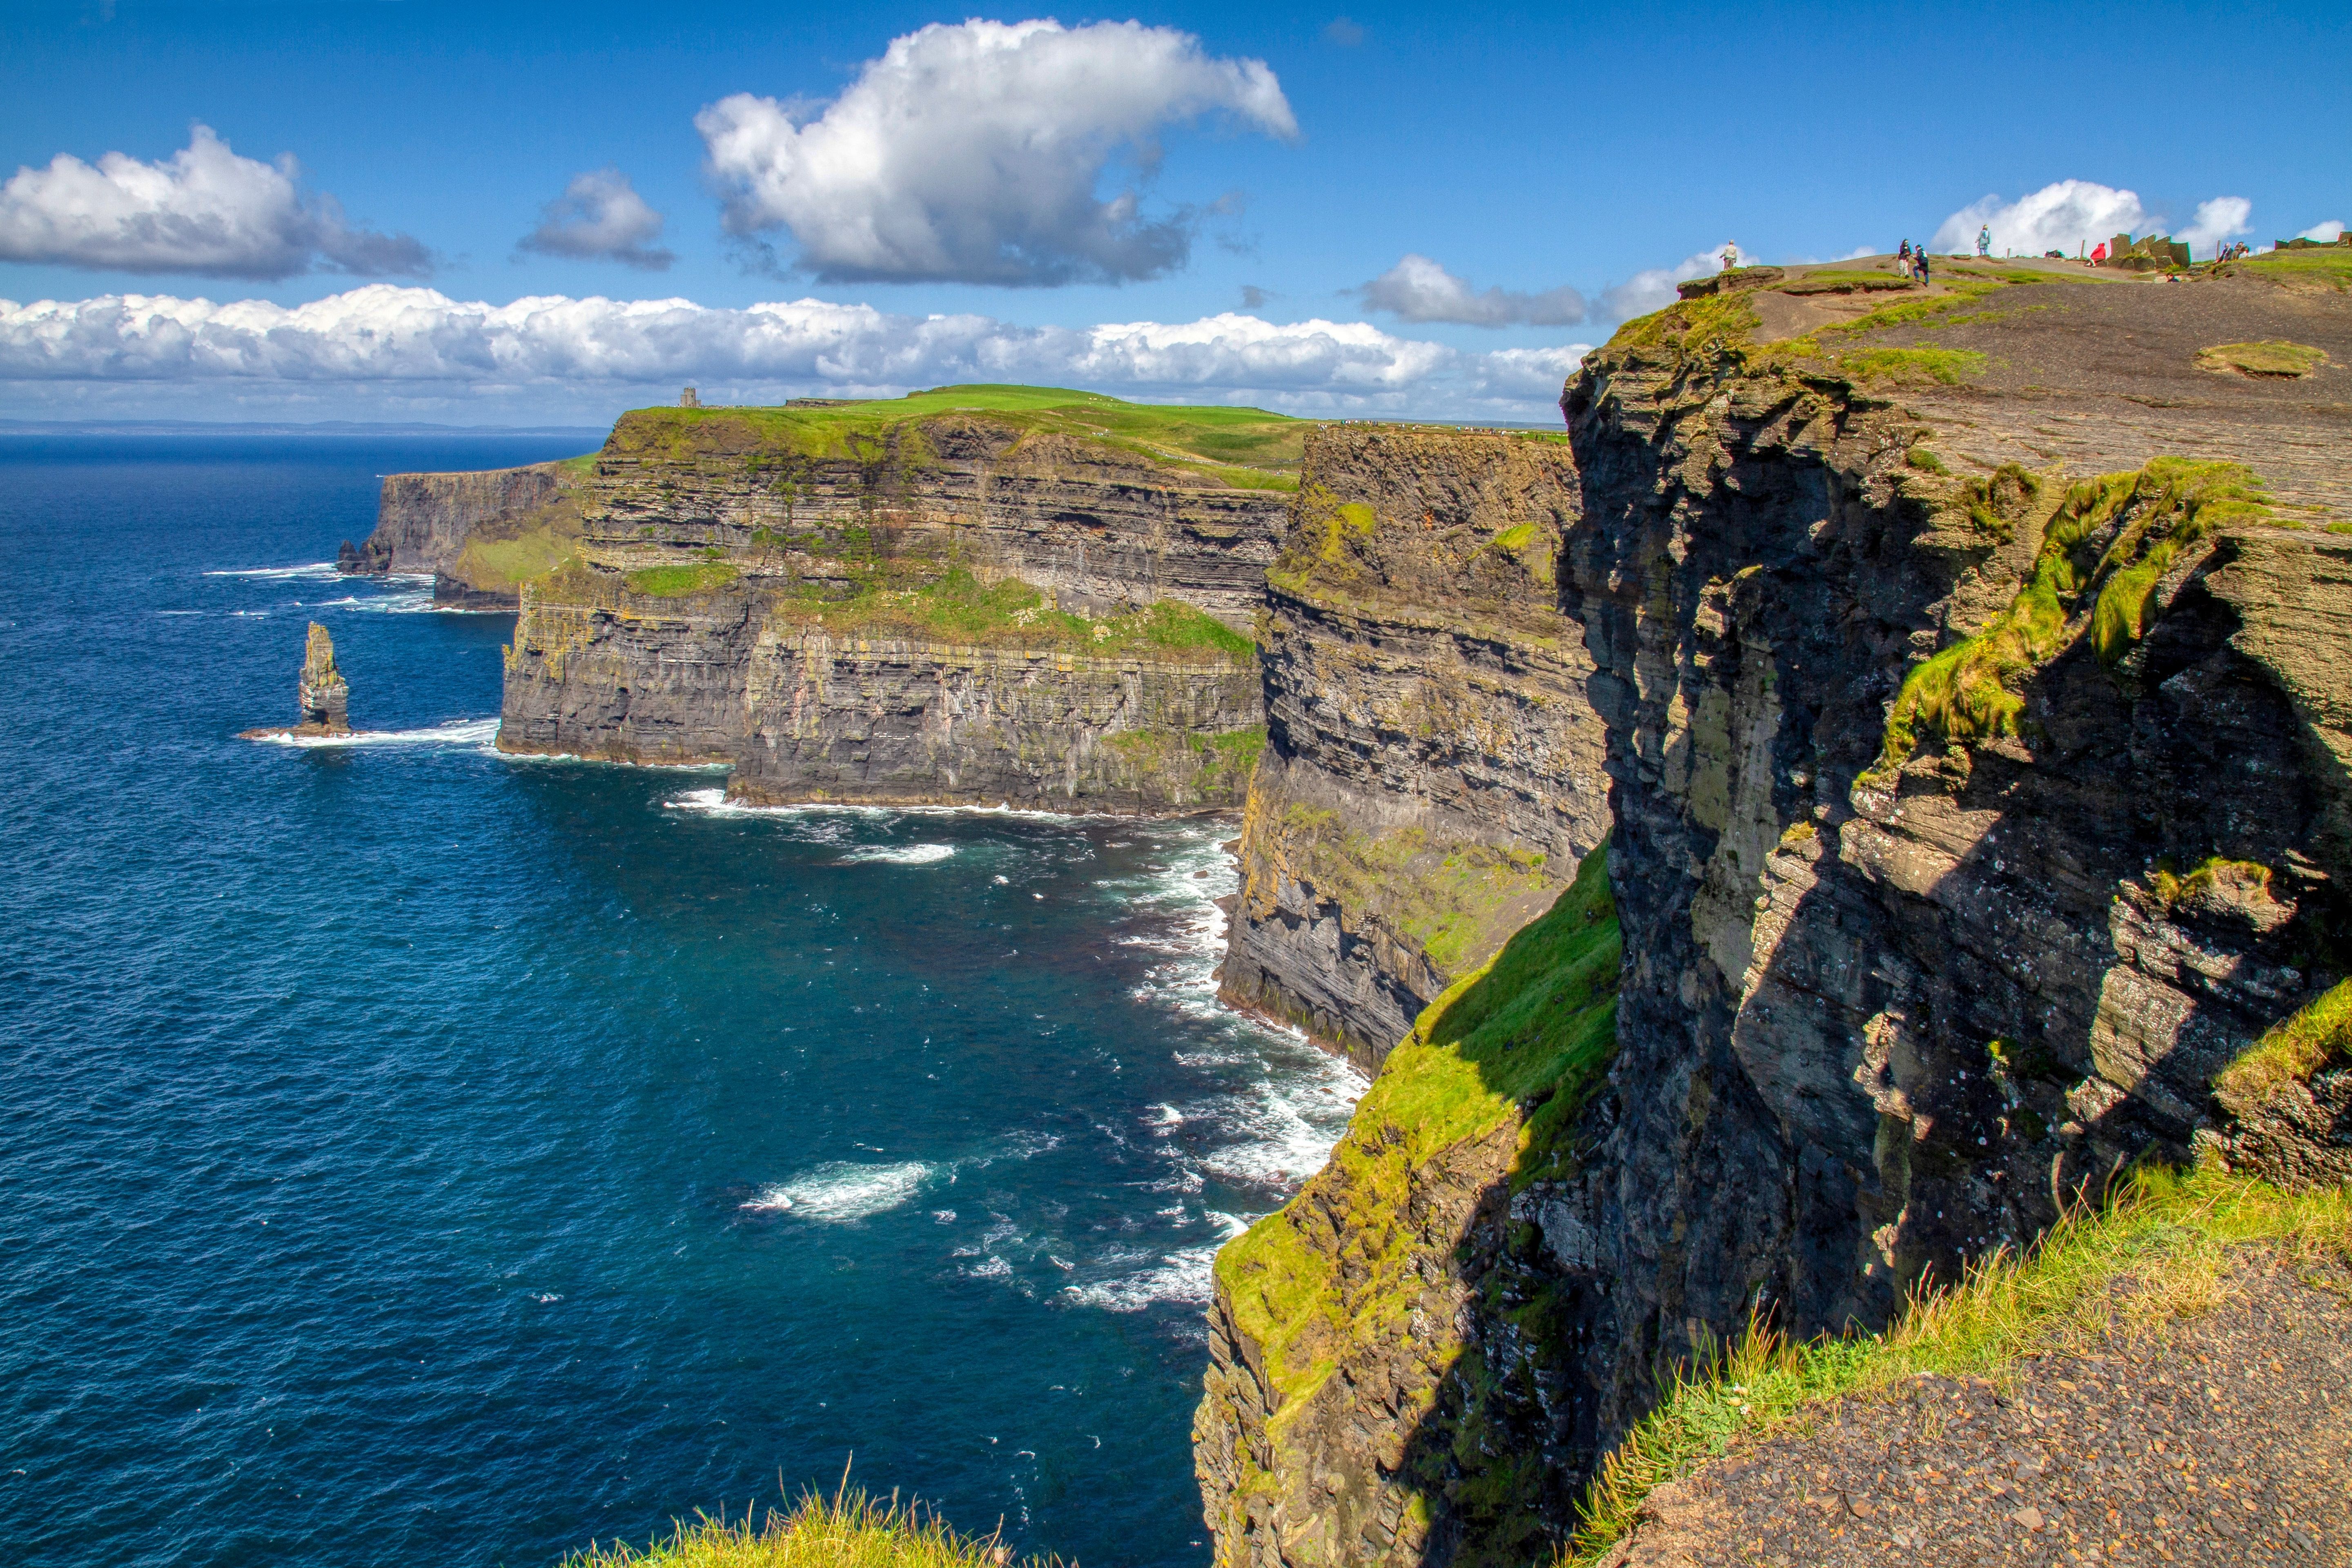 The dramatic gray cliffs Cliffs of Moher in Ireland overlooking the ocean 